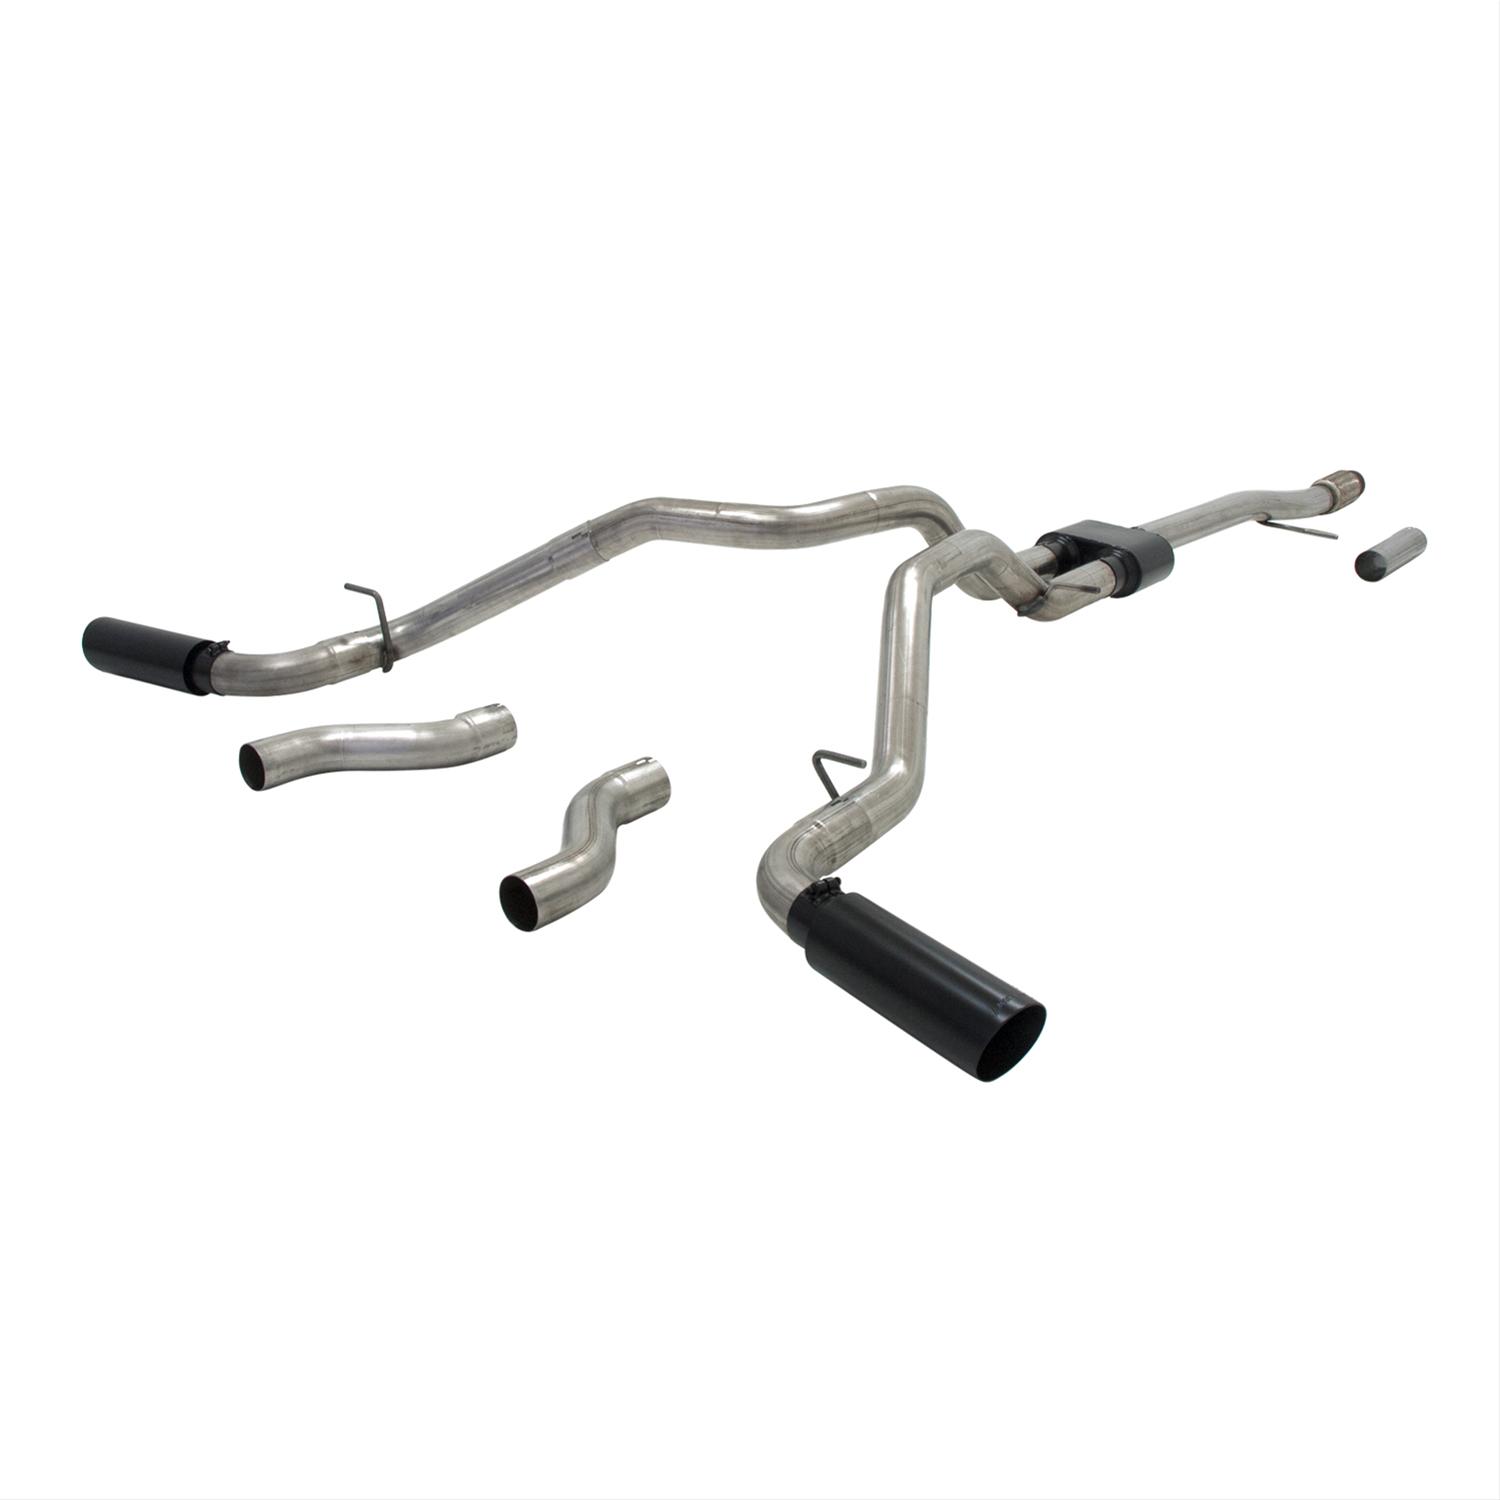 Flowmaster Outlaw Cat-Back Exhaust System Review